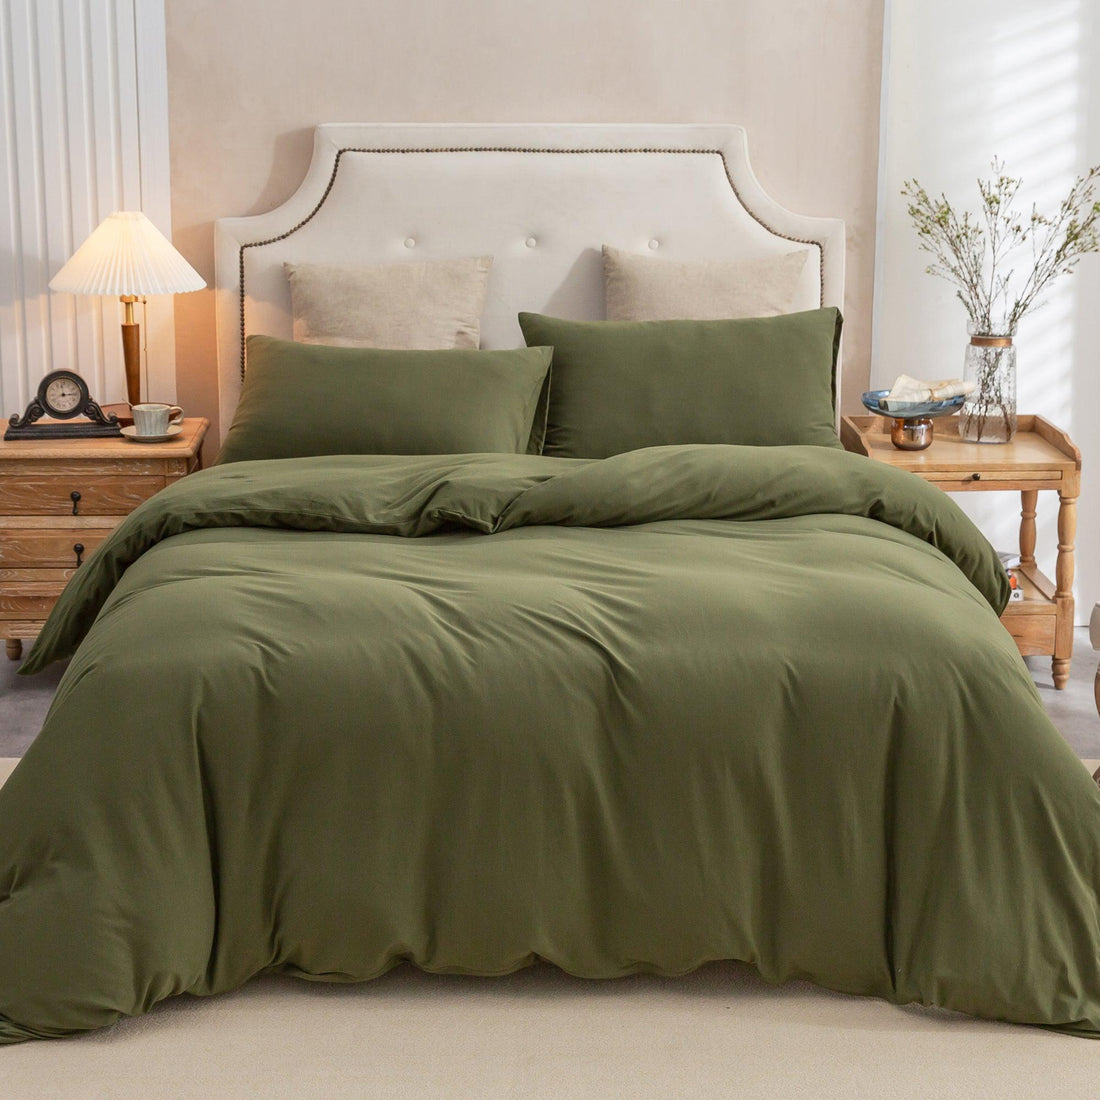 Pure Era - 100% T-shirt cotton Jersey Duvet Cover Set - Olive Green Ultra soft and comfy